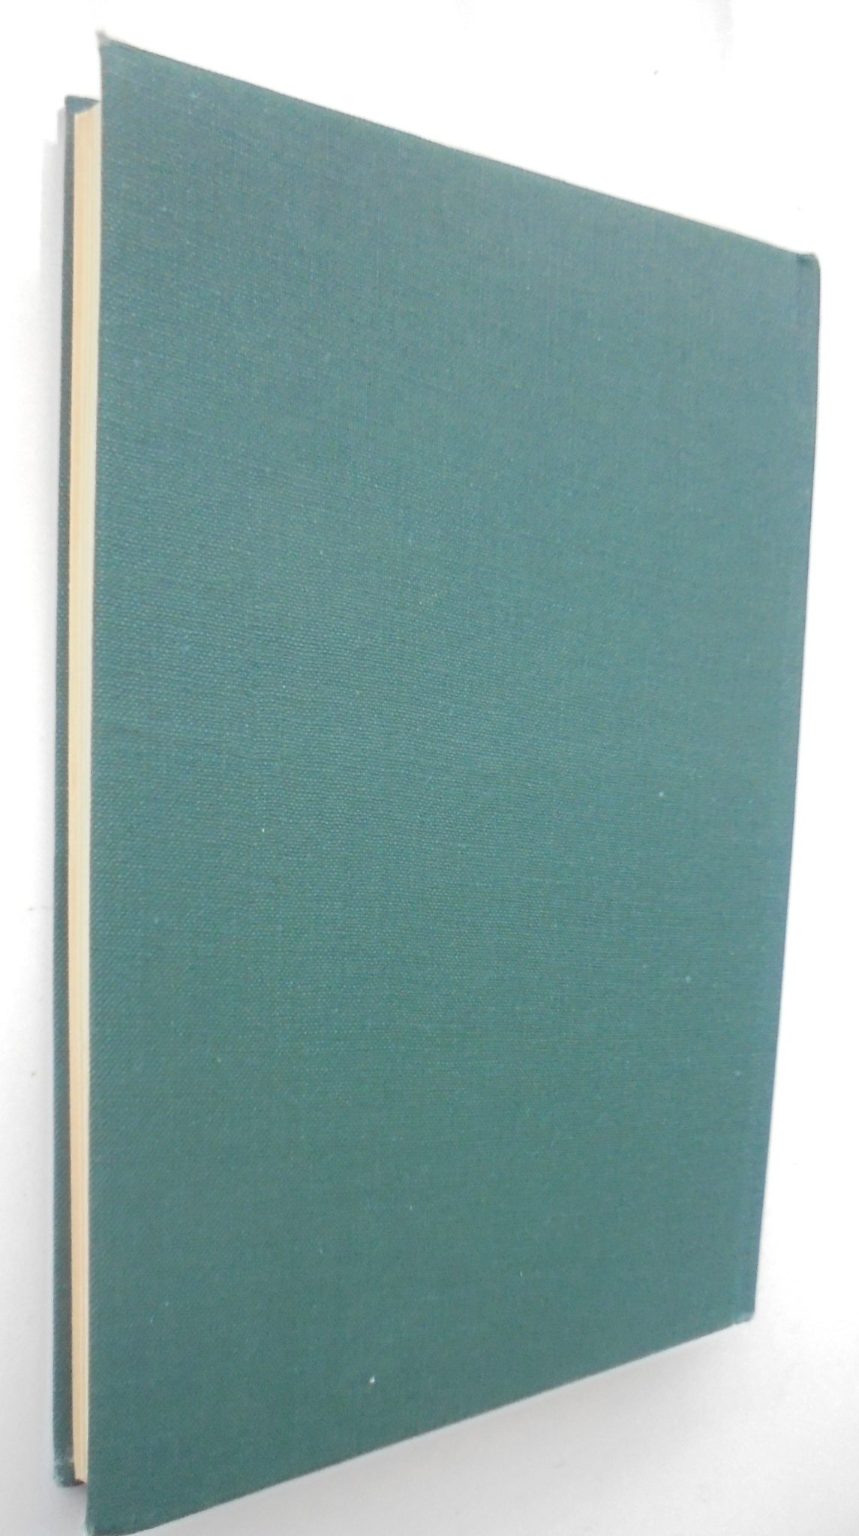 Forest Homes: The Scandinavian Settlements in the Forty Mile Bush. First Edition 1956